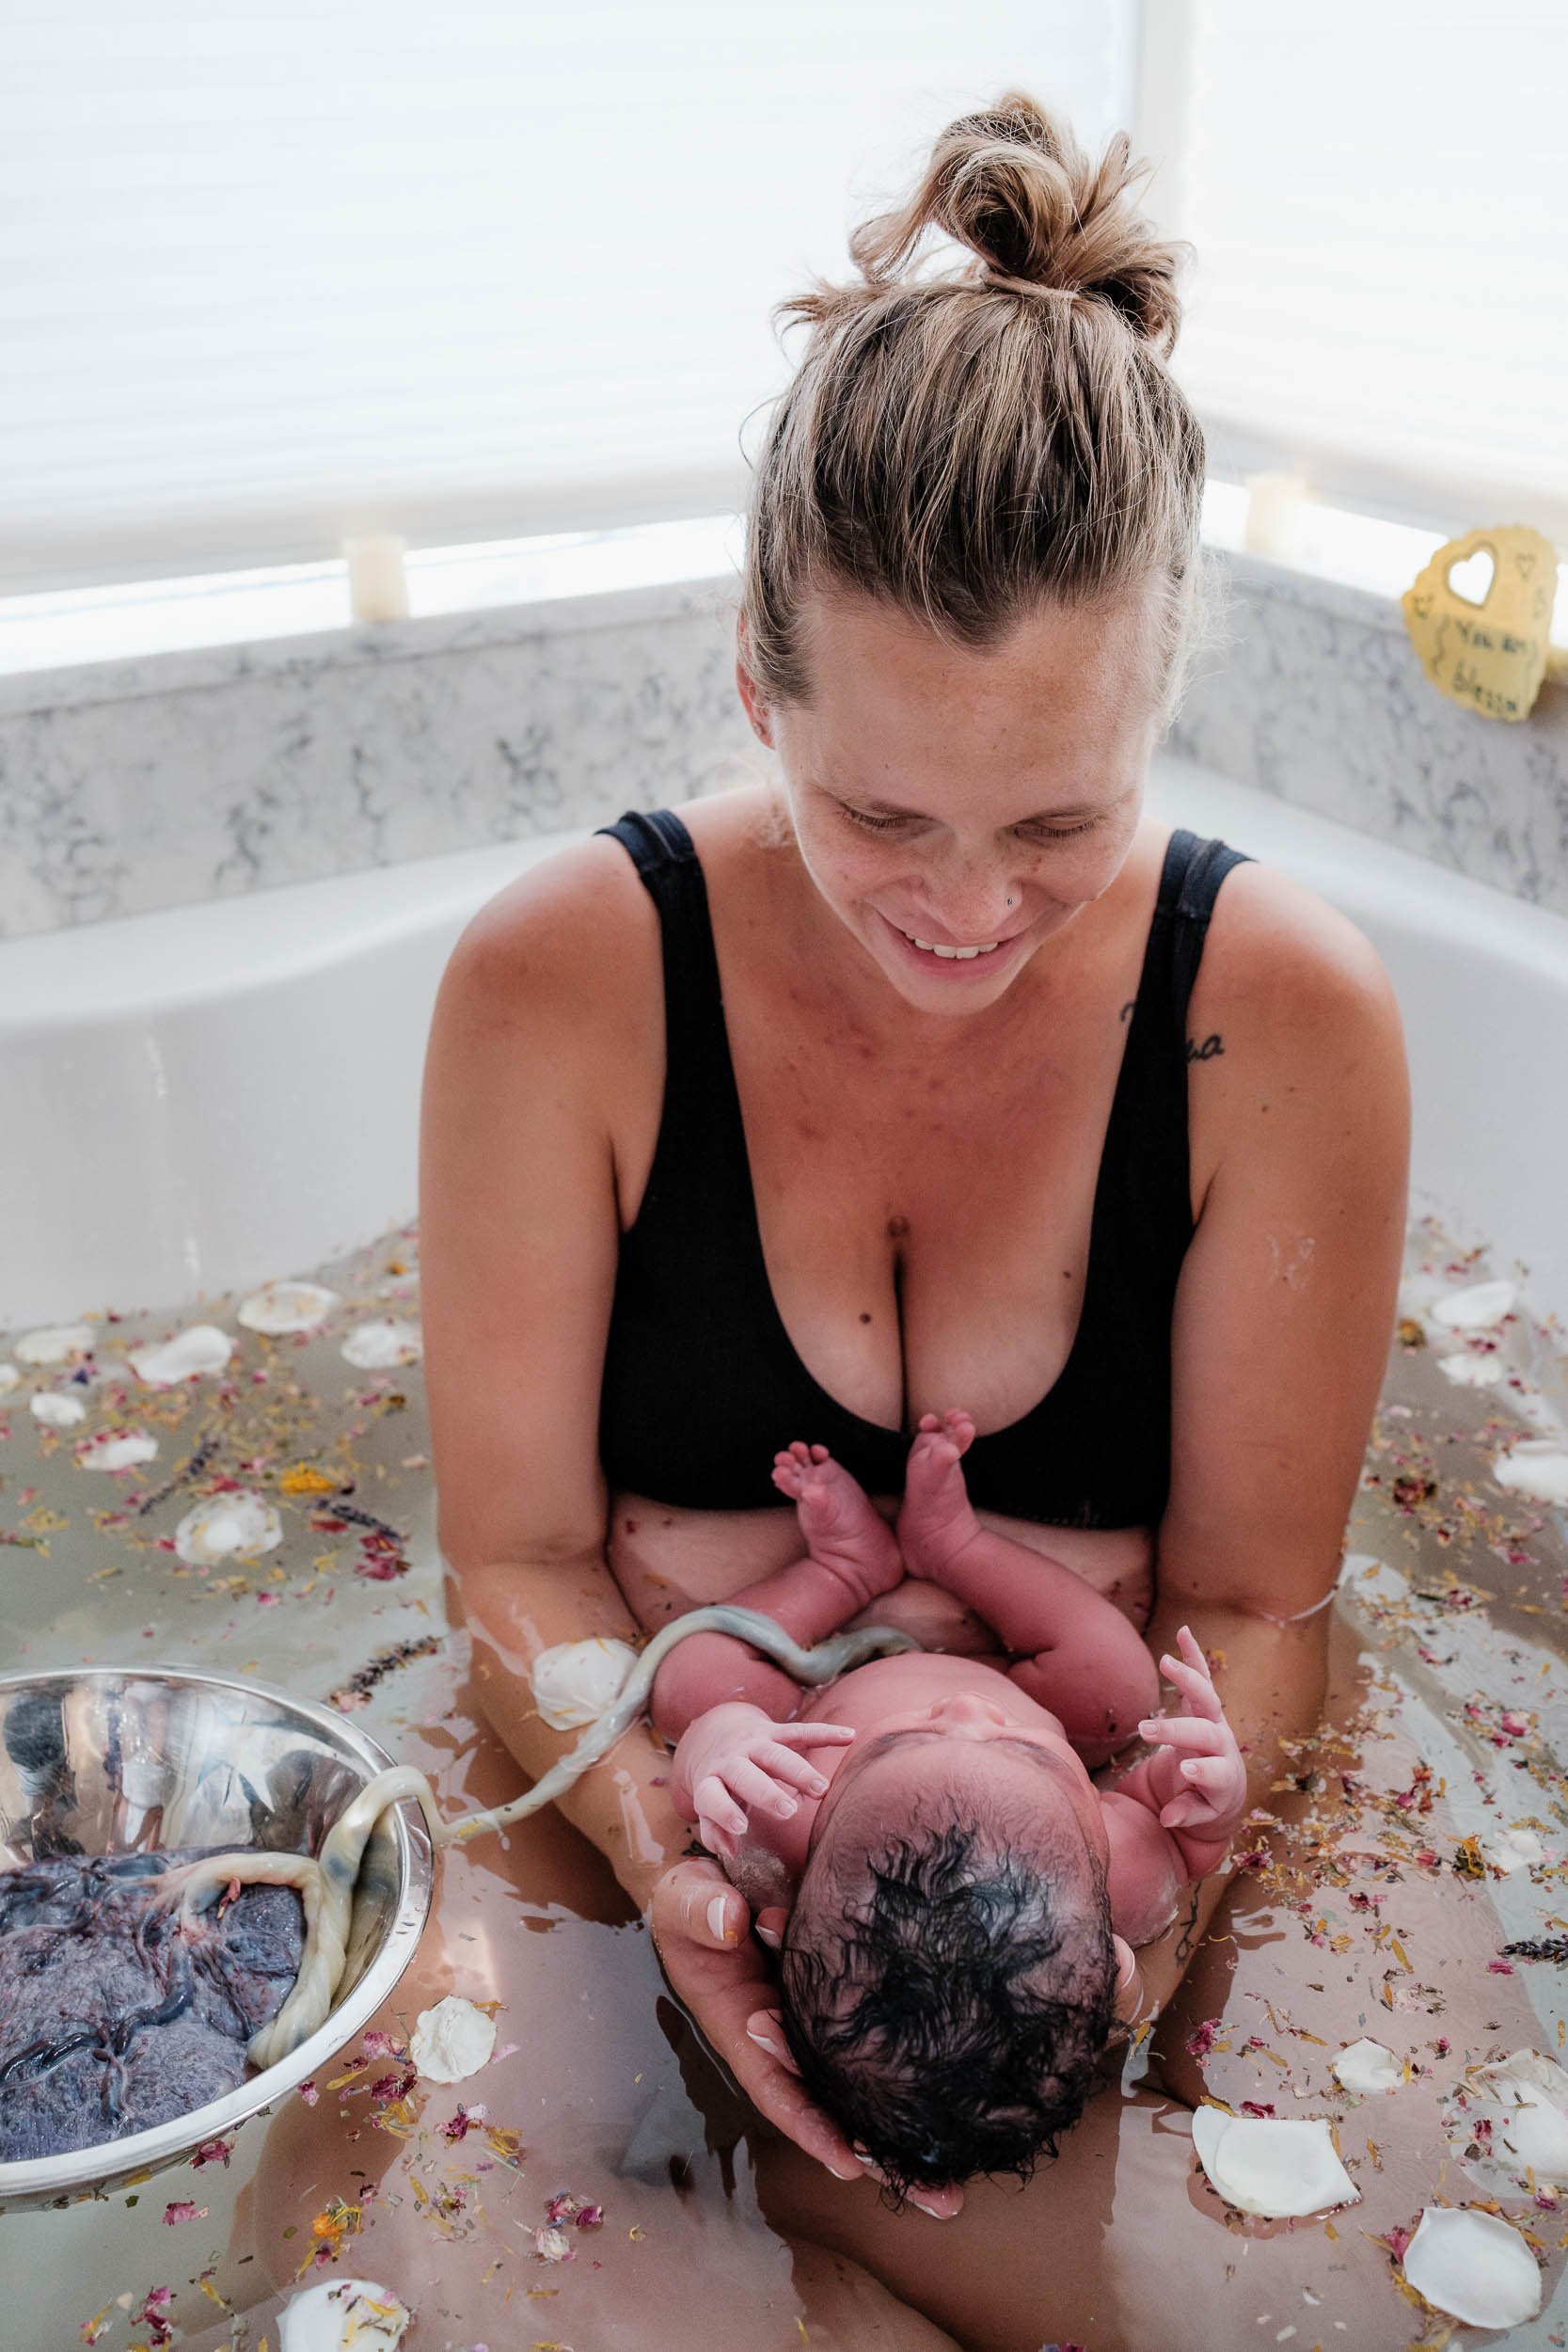 Mother and baby take an herbal bath together fresh after birth. Baby is still connected to their placenta.